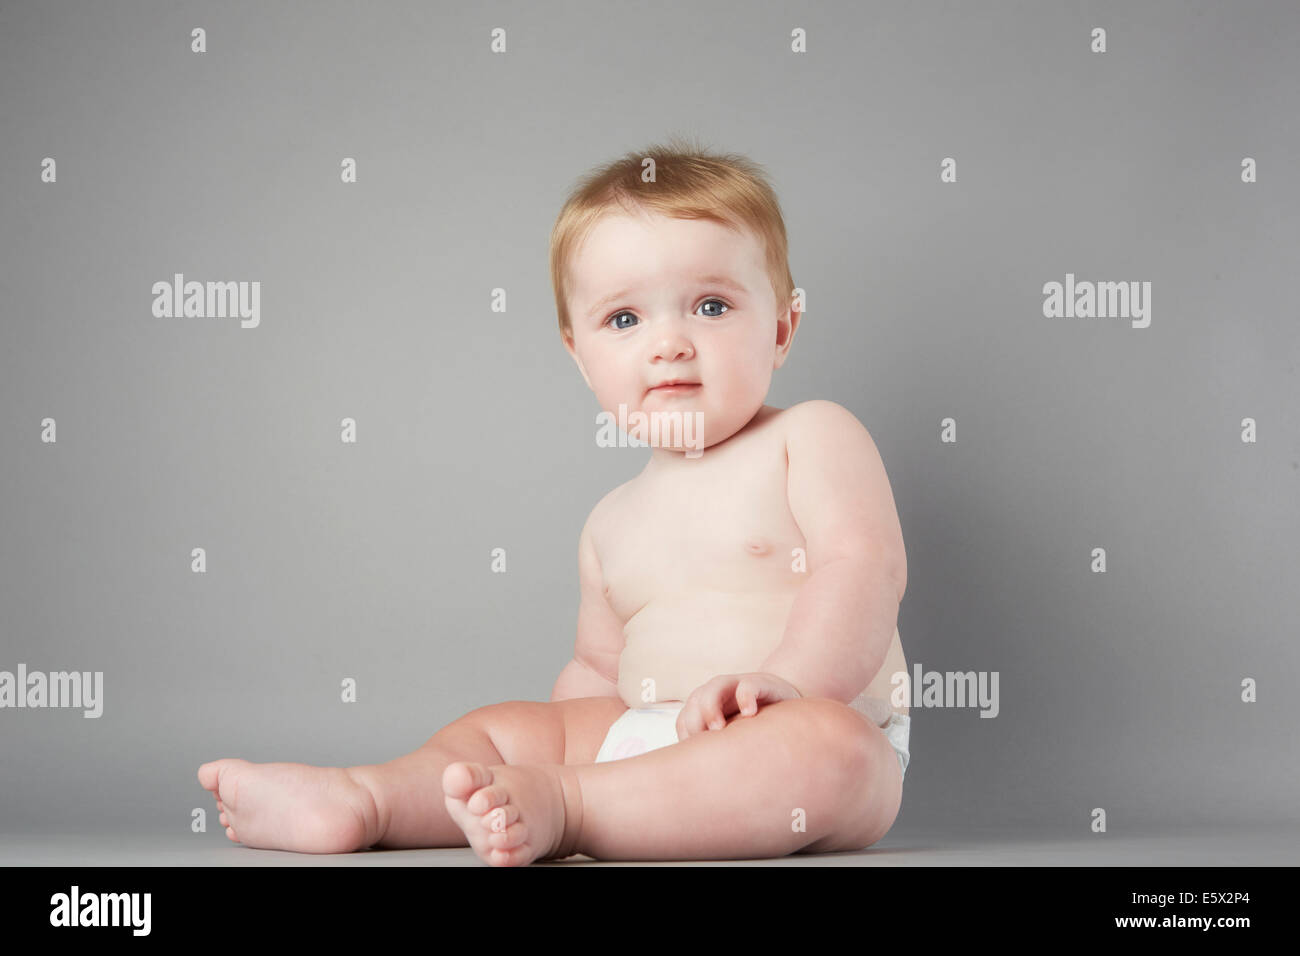 Studio portrait of baby girl sitting up perplexe Banque D'Images